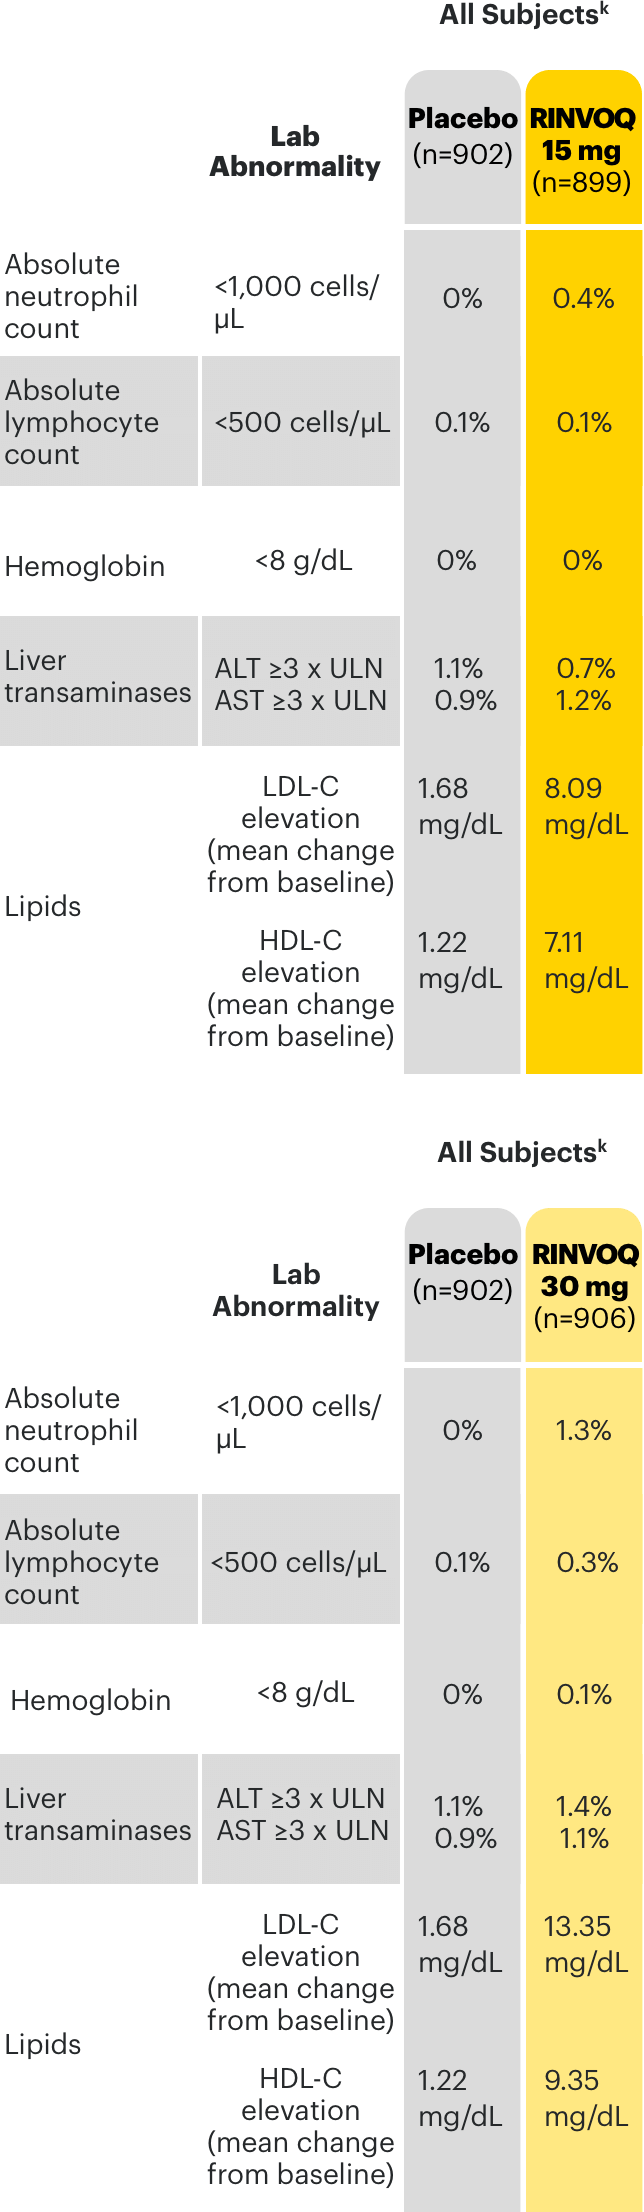 Graph representing lab abnormalities: placebo-controlled period through 16 weeks.